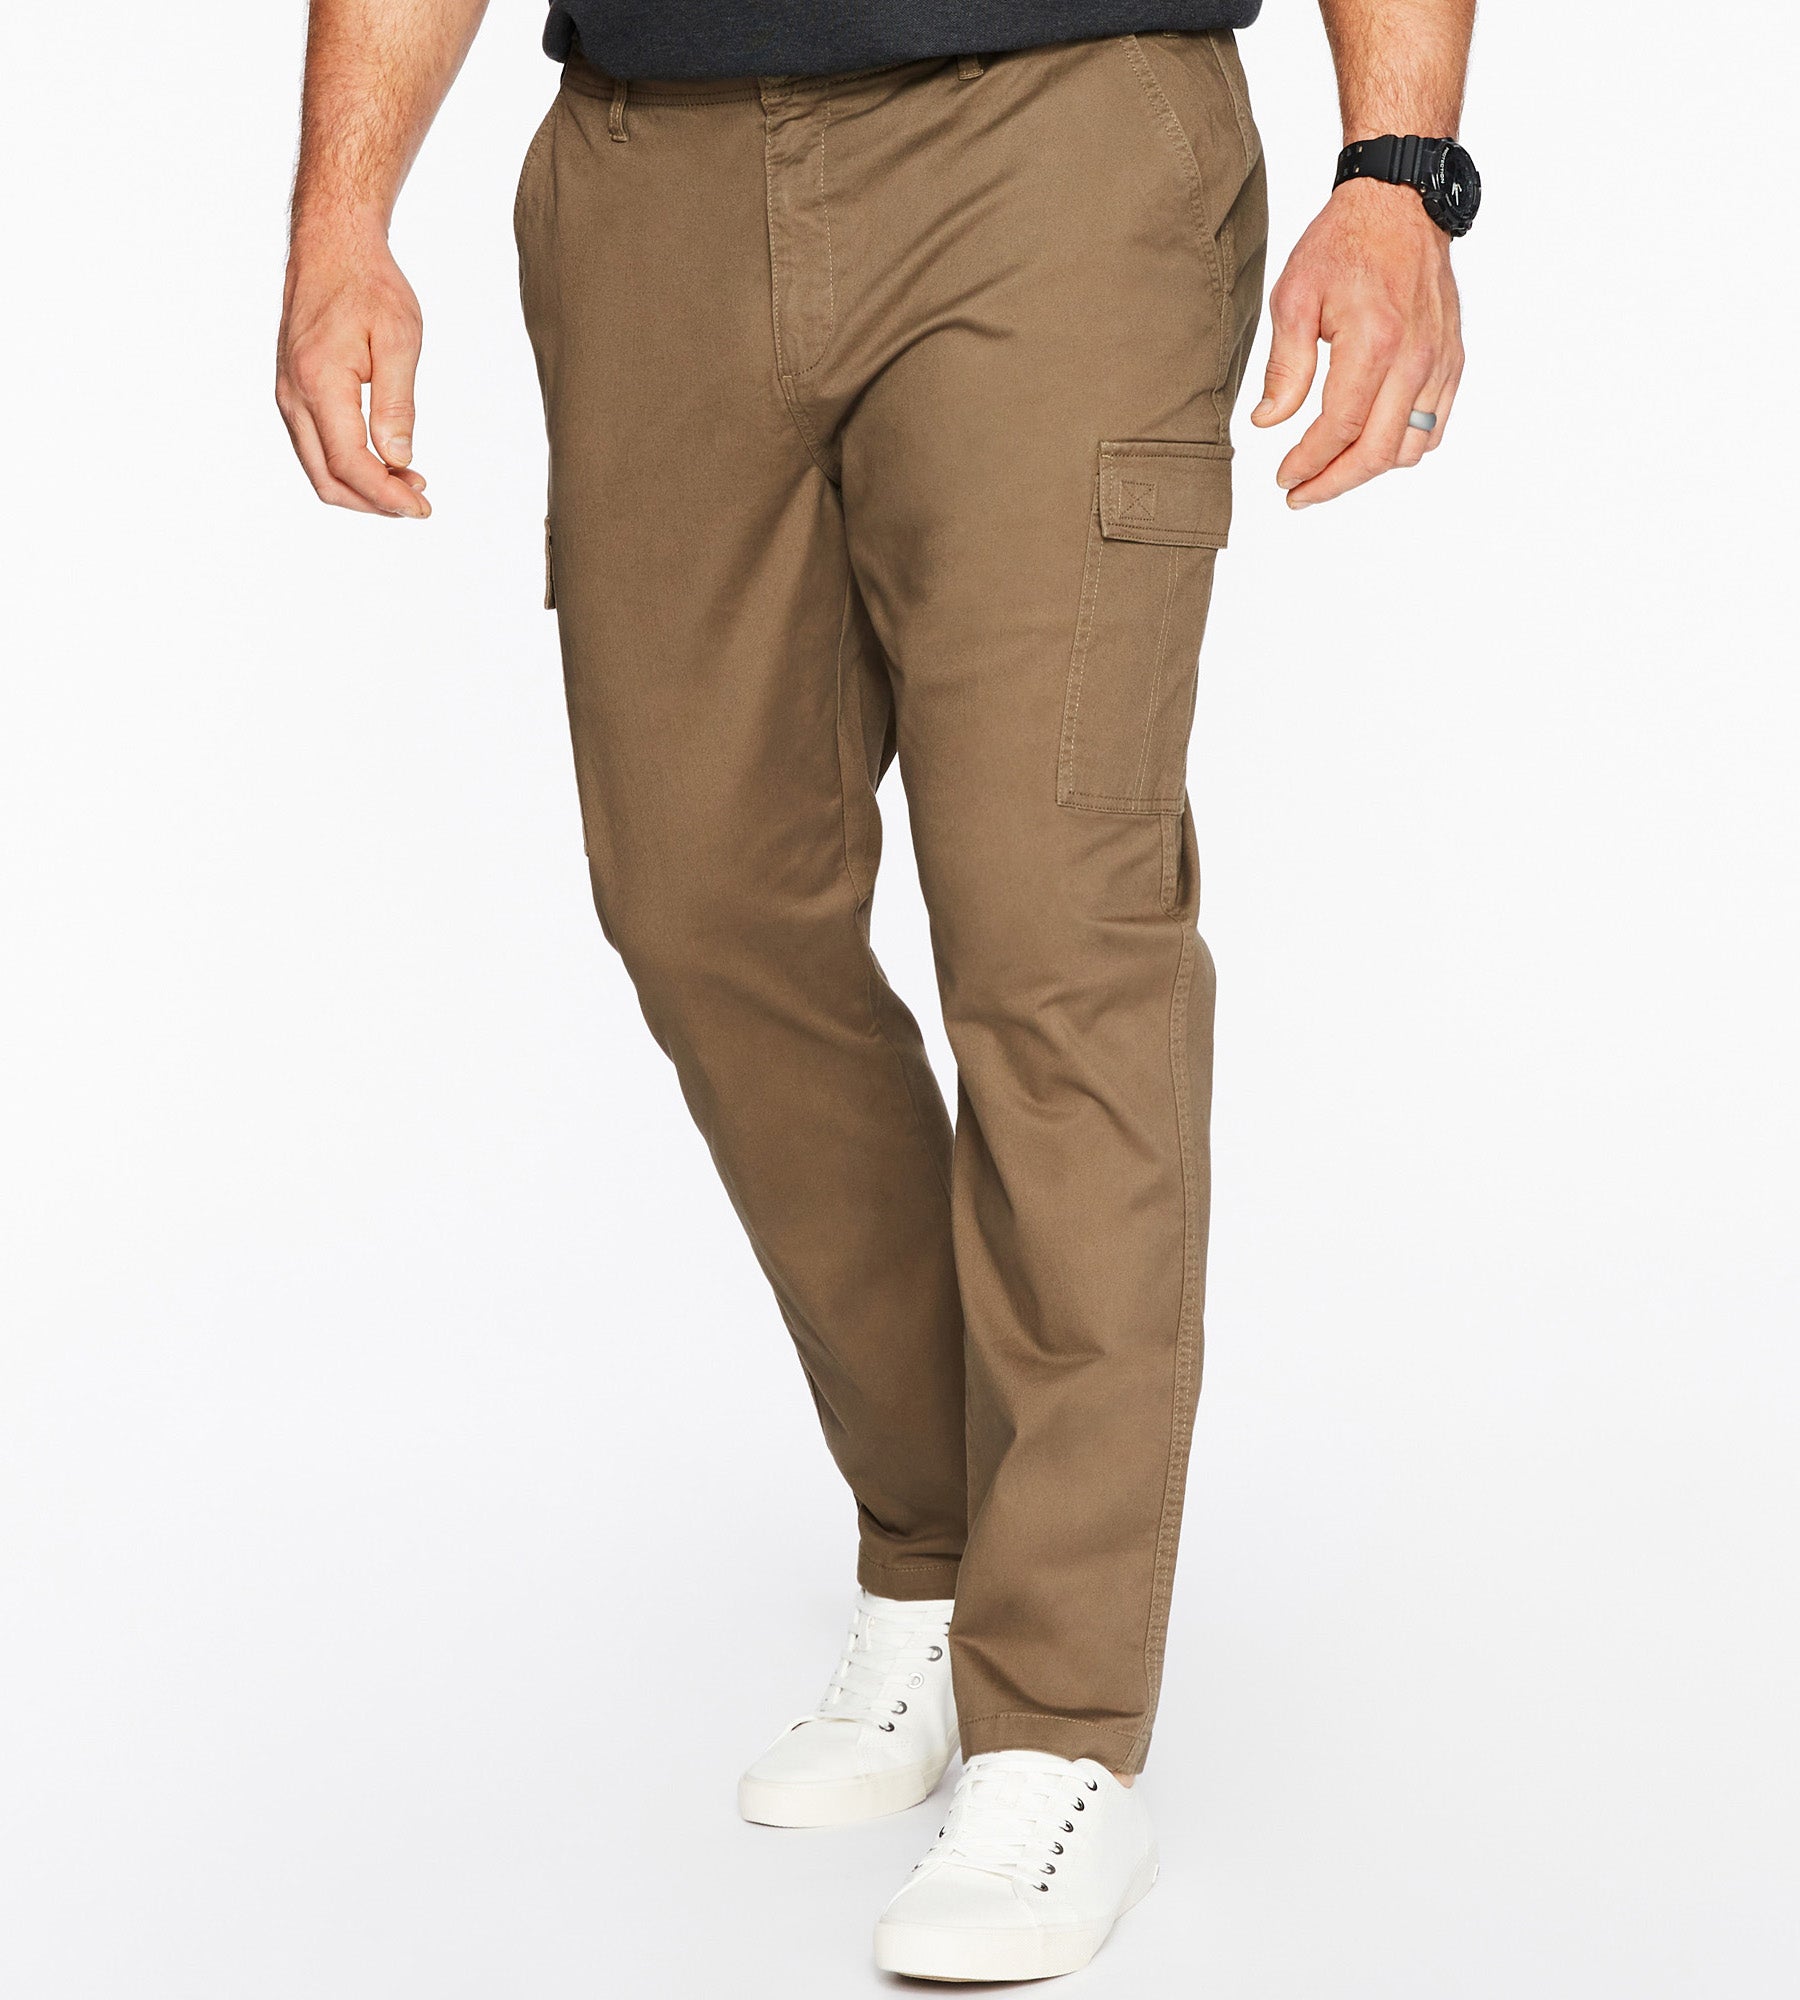 Tall Slim Fit Cargo Pants  Cargo trousers, Slim fit cargo pants